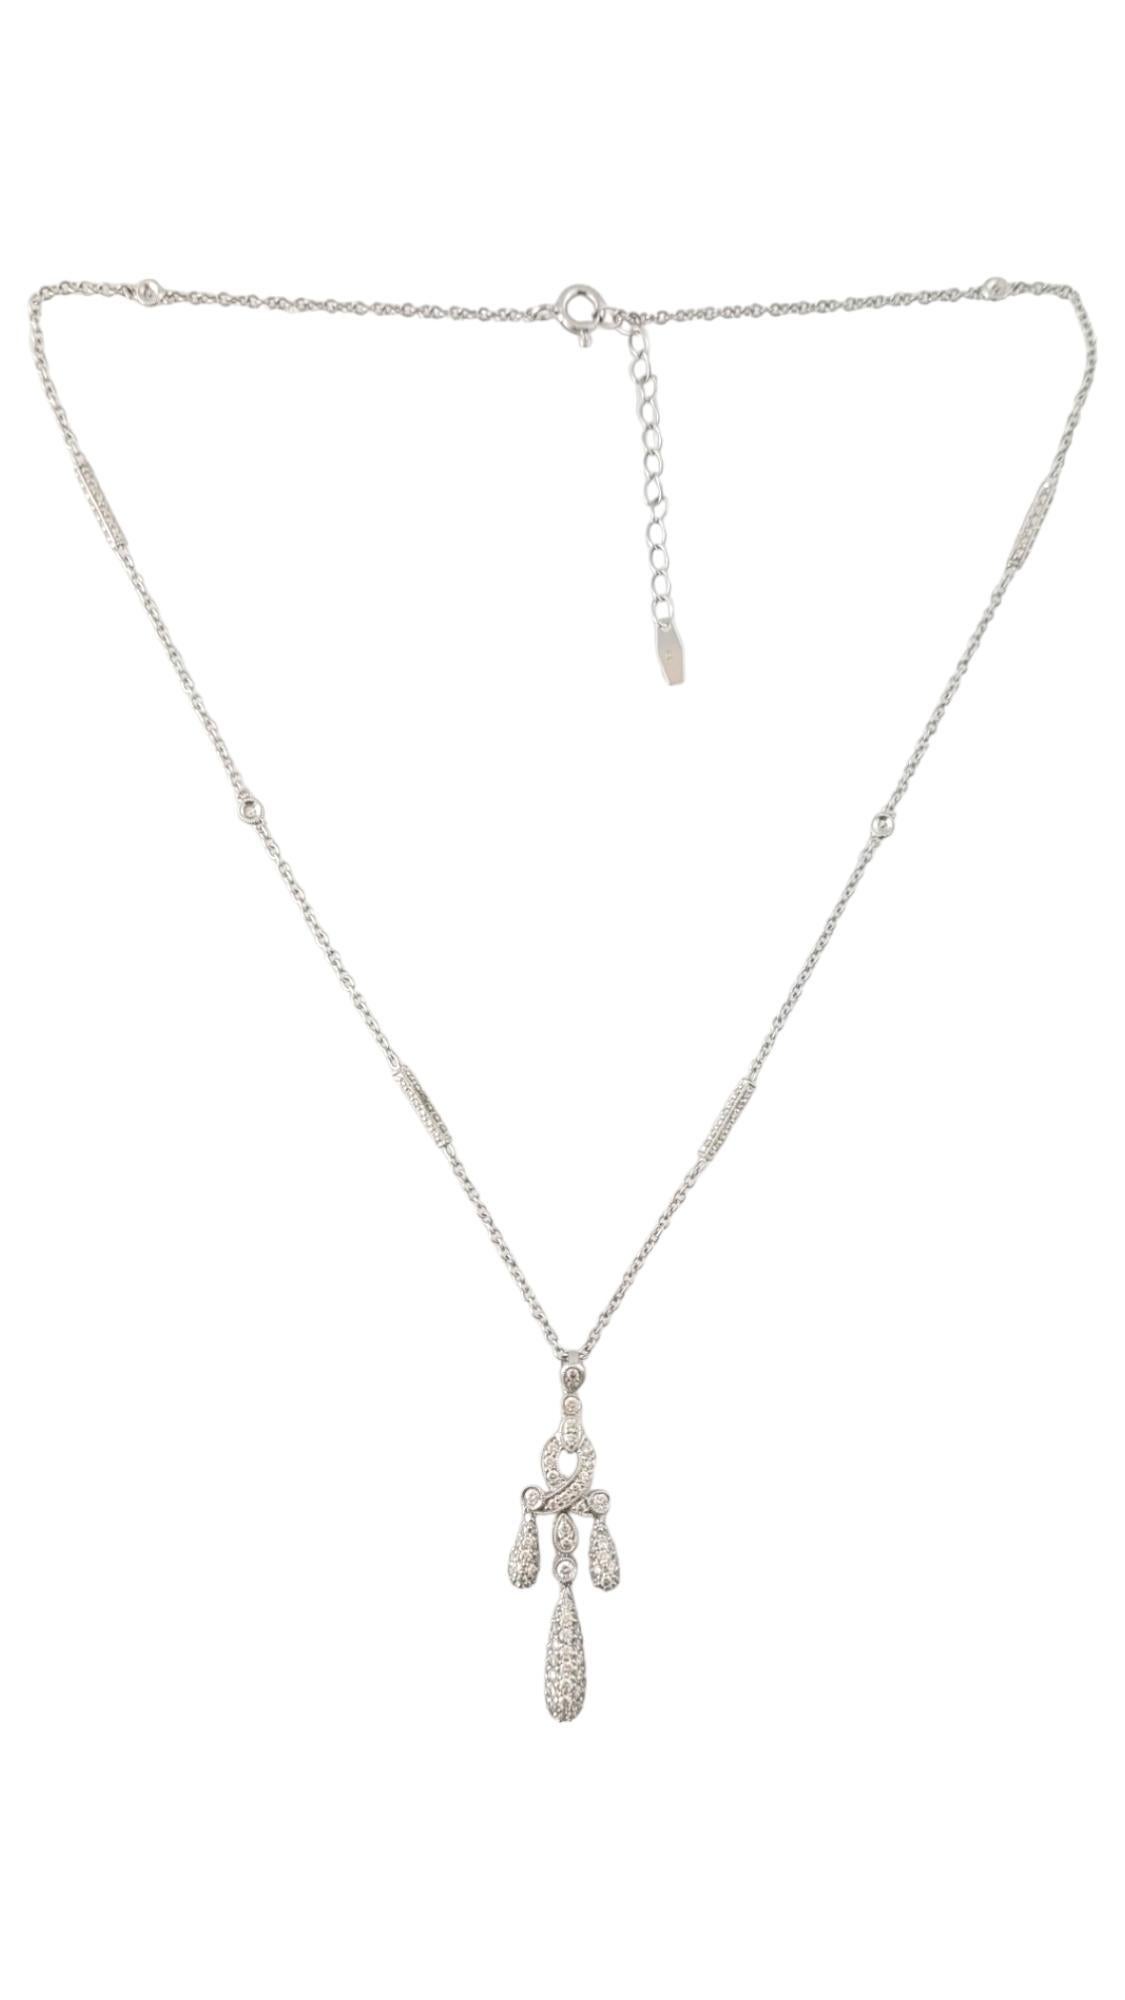 Vintage 18K White Gold Diamond Drop Pendant Necklace

This fabulous piece features a stunning diamond drop pendant on a white gold diamond chain with 180 sparkling round cut diamonds in total!

Approximate total diamond weight: 2 cts

Diamond color: